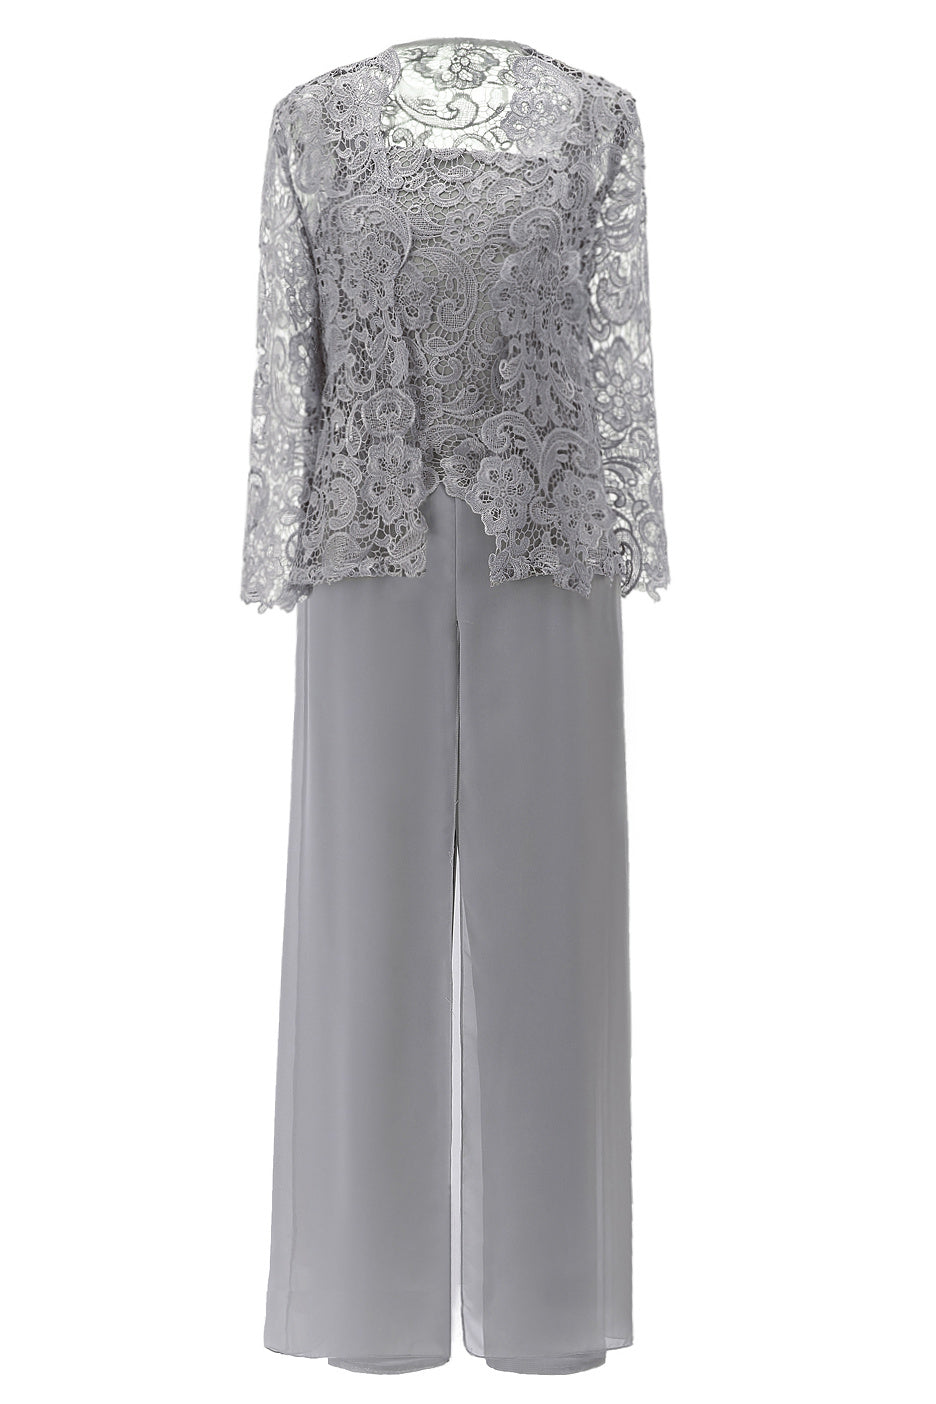 Grey Three-Piece Lace Mother of the Bride Pant Suits – Dreamdressy